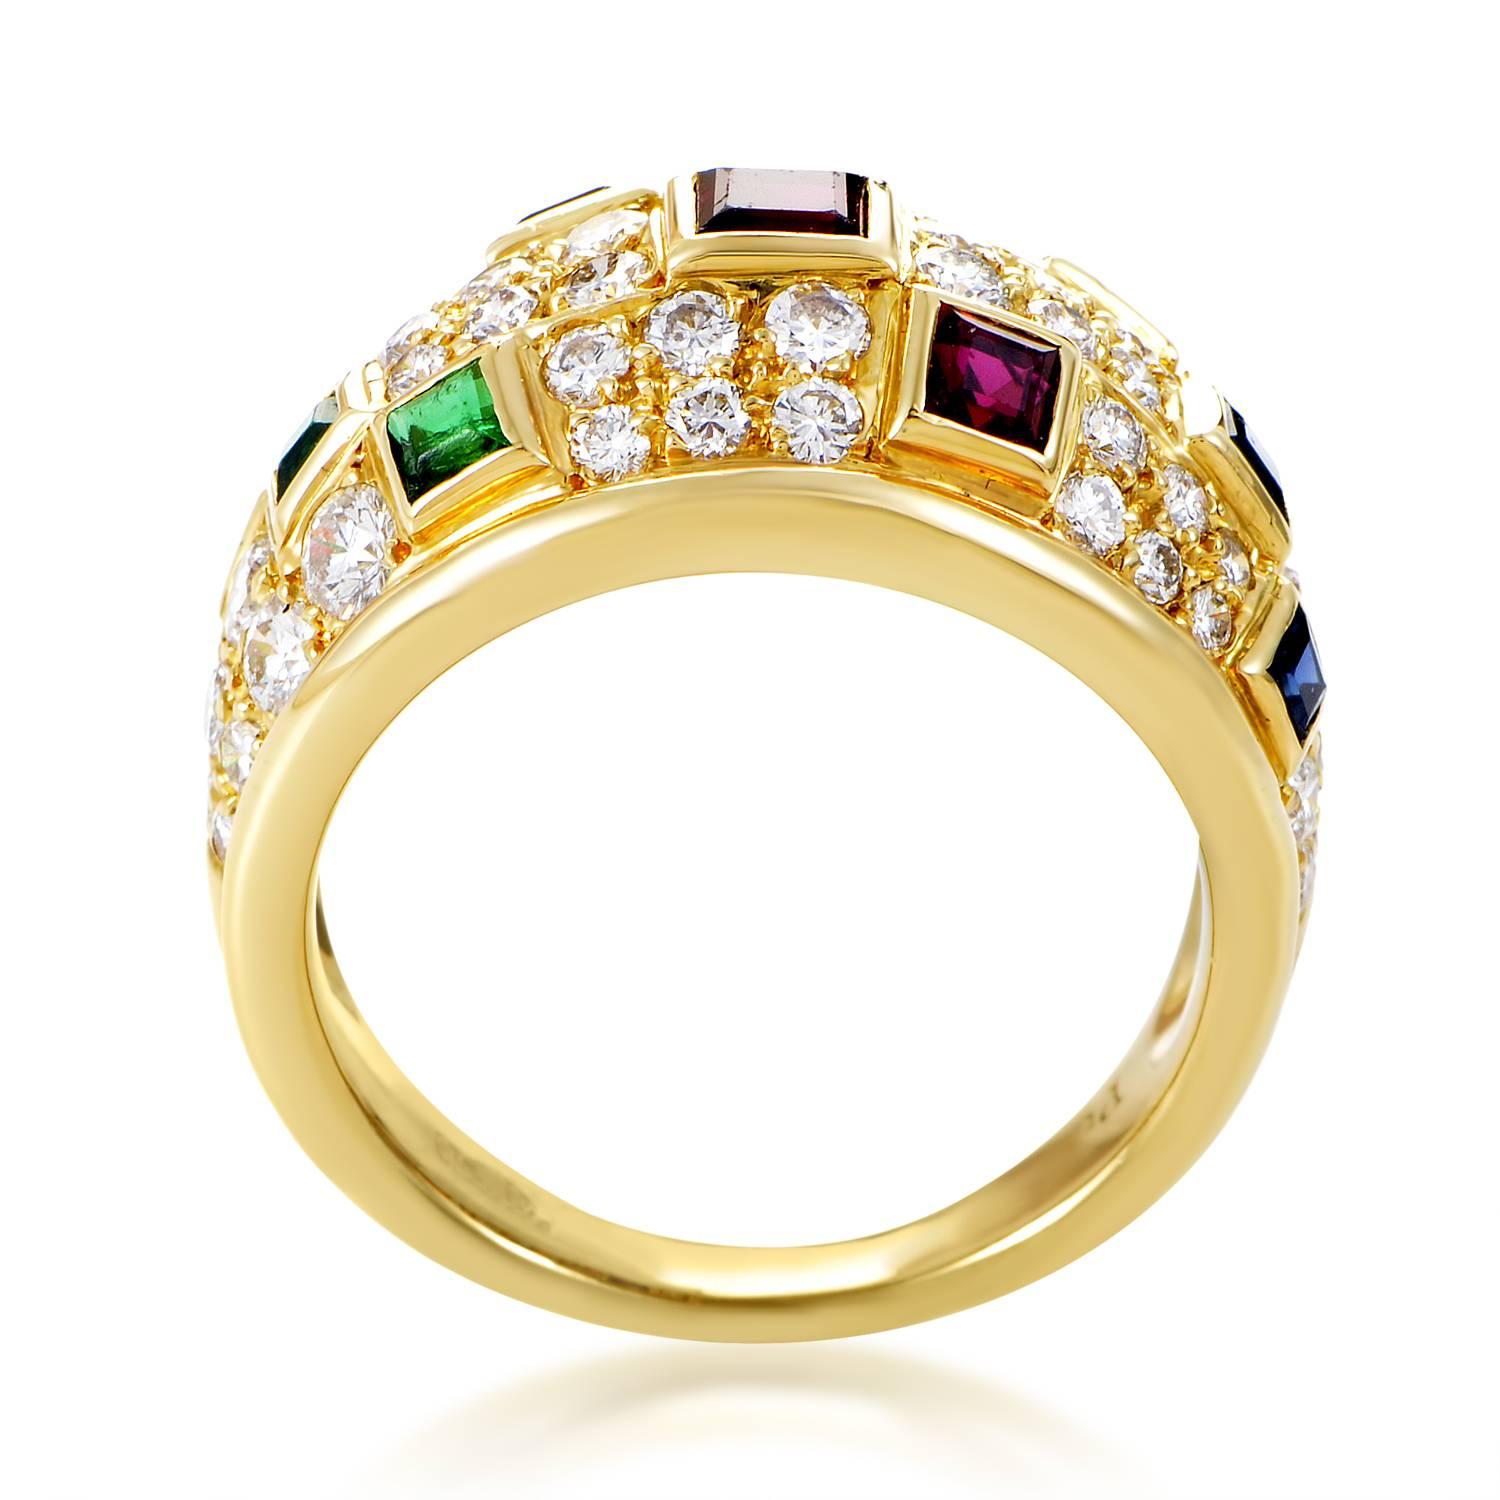 A rainbow of precious gemstones is the hallmark of this decadent ring from Piaget. The ring is made of 18K yellow gold and is paved with 1.35ct of diamonds. Lastly, dispersed throughout the design are colored gemstones including; .30ct of emeralds,